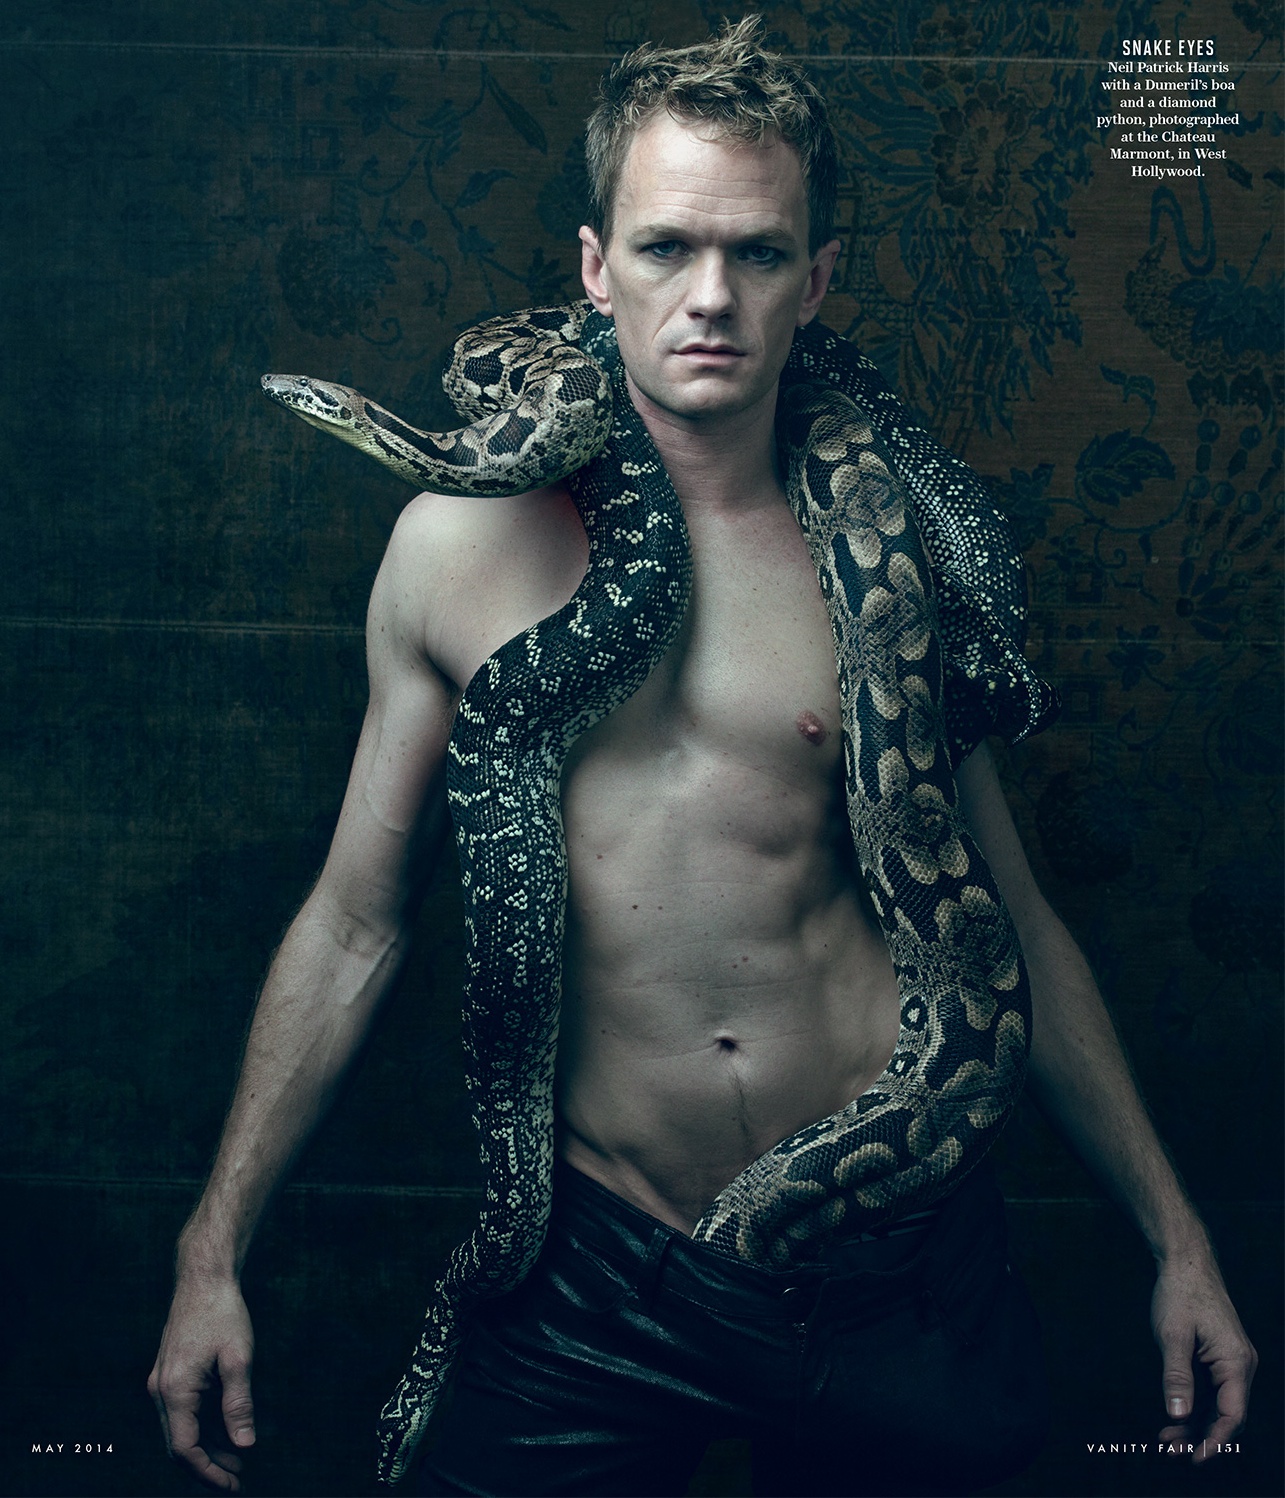 Neil Patrick Harris Poses Shirtless with Boa Snake for Vanity Fair